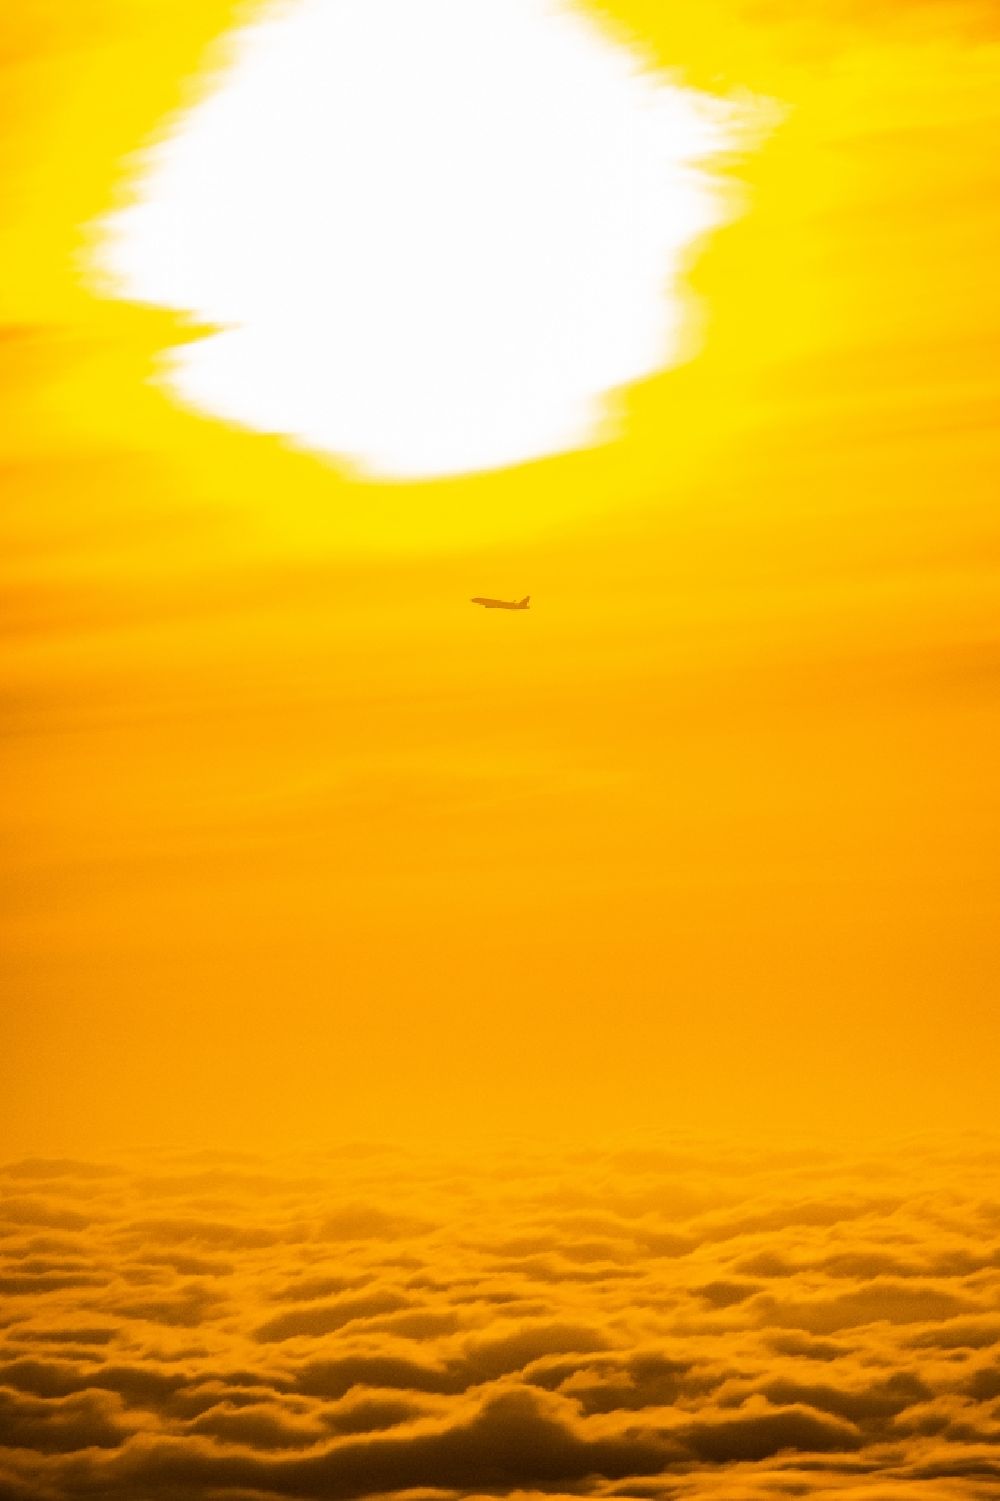 Aerial photograph Norderstedt - Airliner in the sunrise over the clouds after take-off in Hamburg Fuhlsbuettel in the height of Norderstedt in the state Schleswig-Holstein Germany